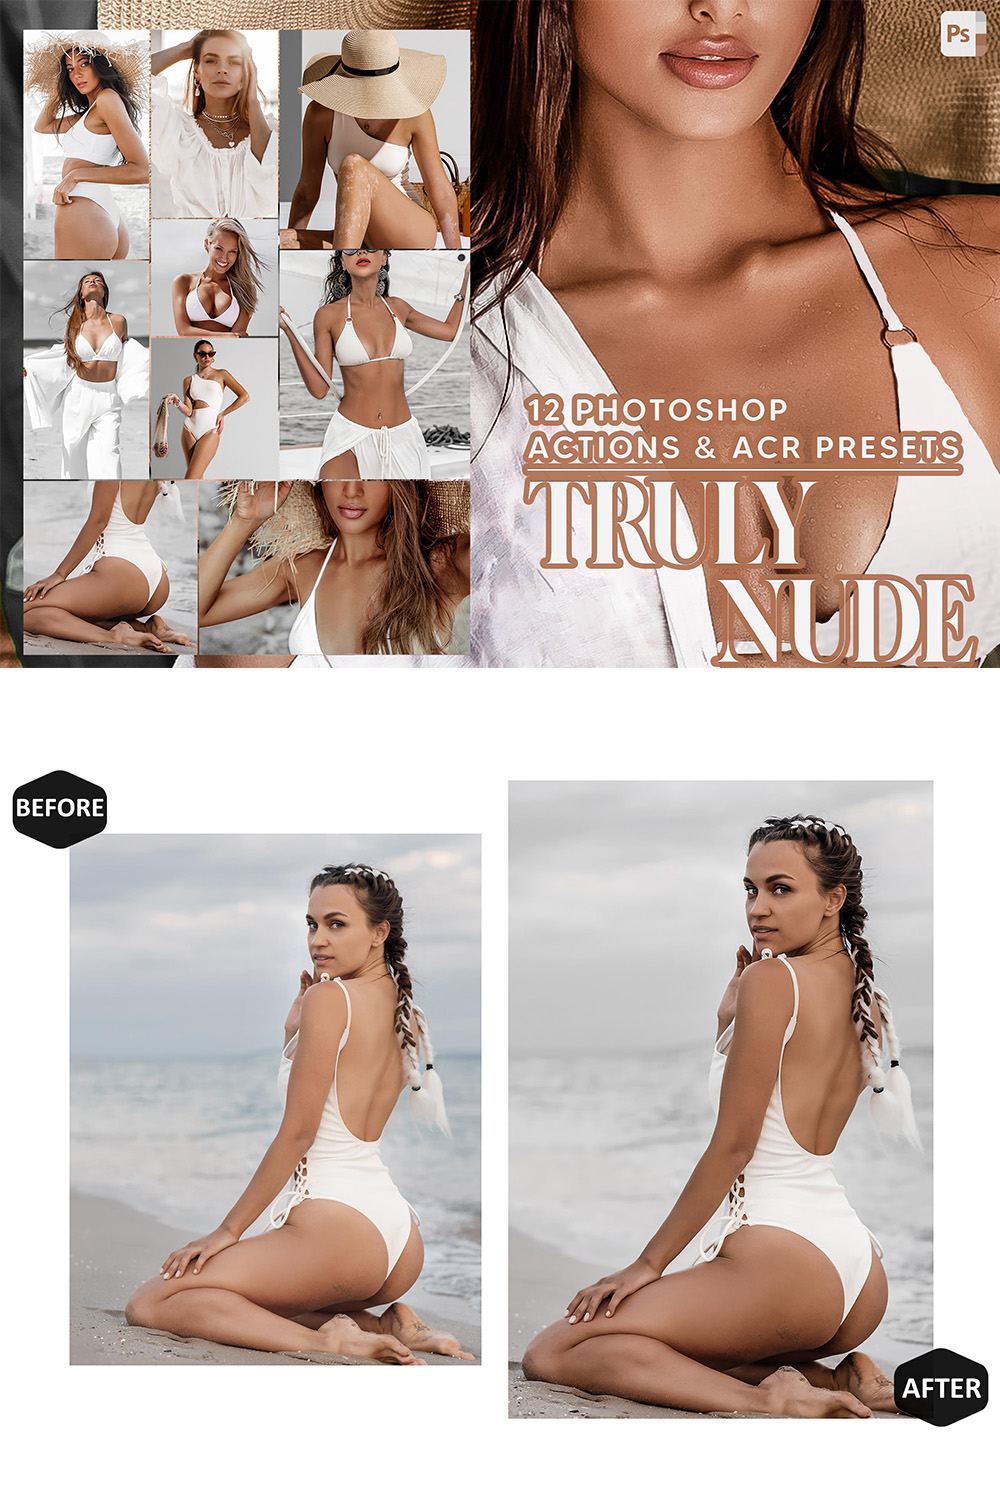 12 Photoshop Actions, Truly Nude Ps Action, Boudoir ACR Preset, Brown Skin Ps Filter, Atn Portrait And Lifestyle Theme For Instagram, Blogger pinterest preview image.